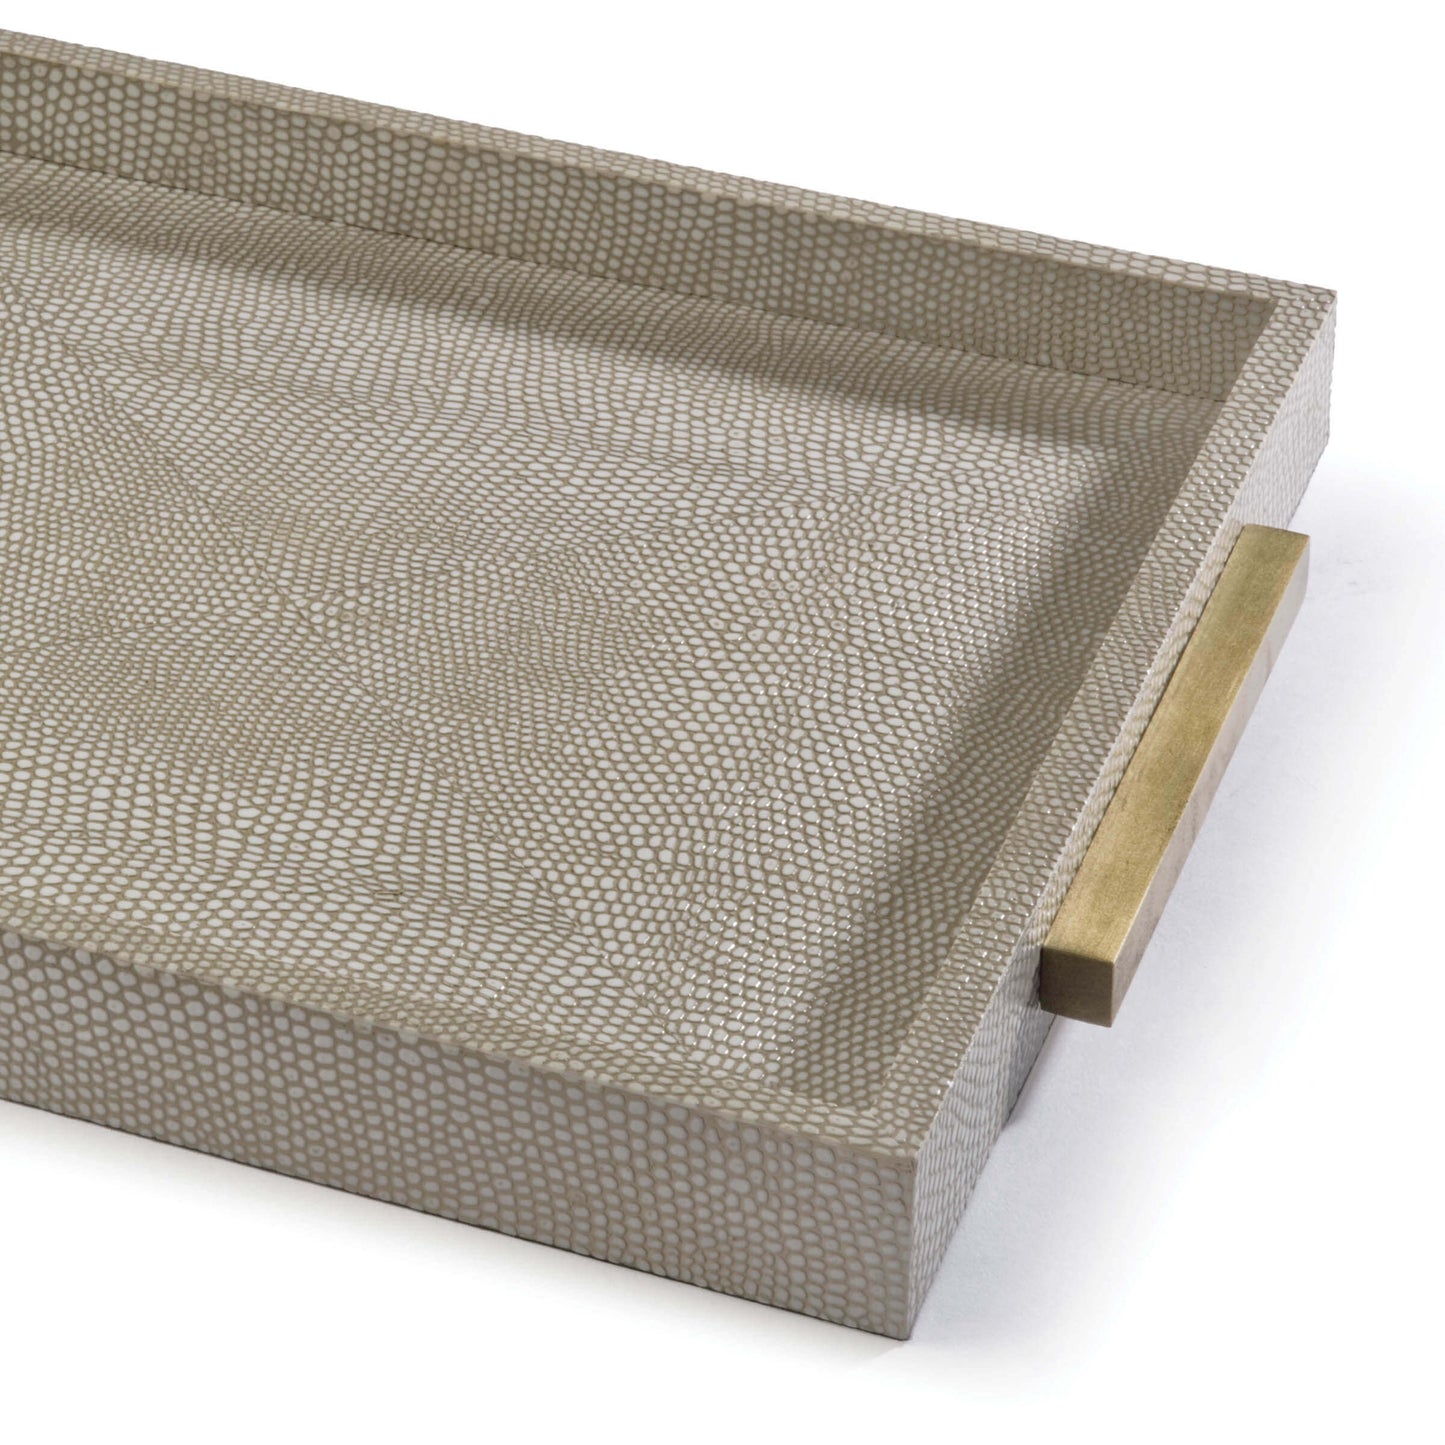 Regina Andrew Square Shagreen Boutique Tray in Ivory Grey Python